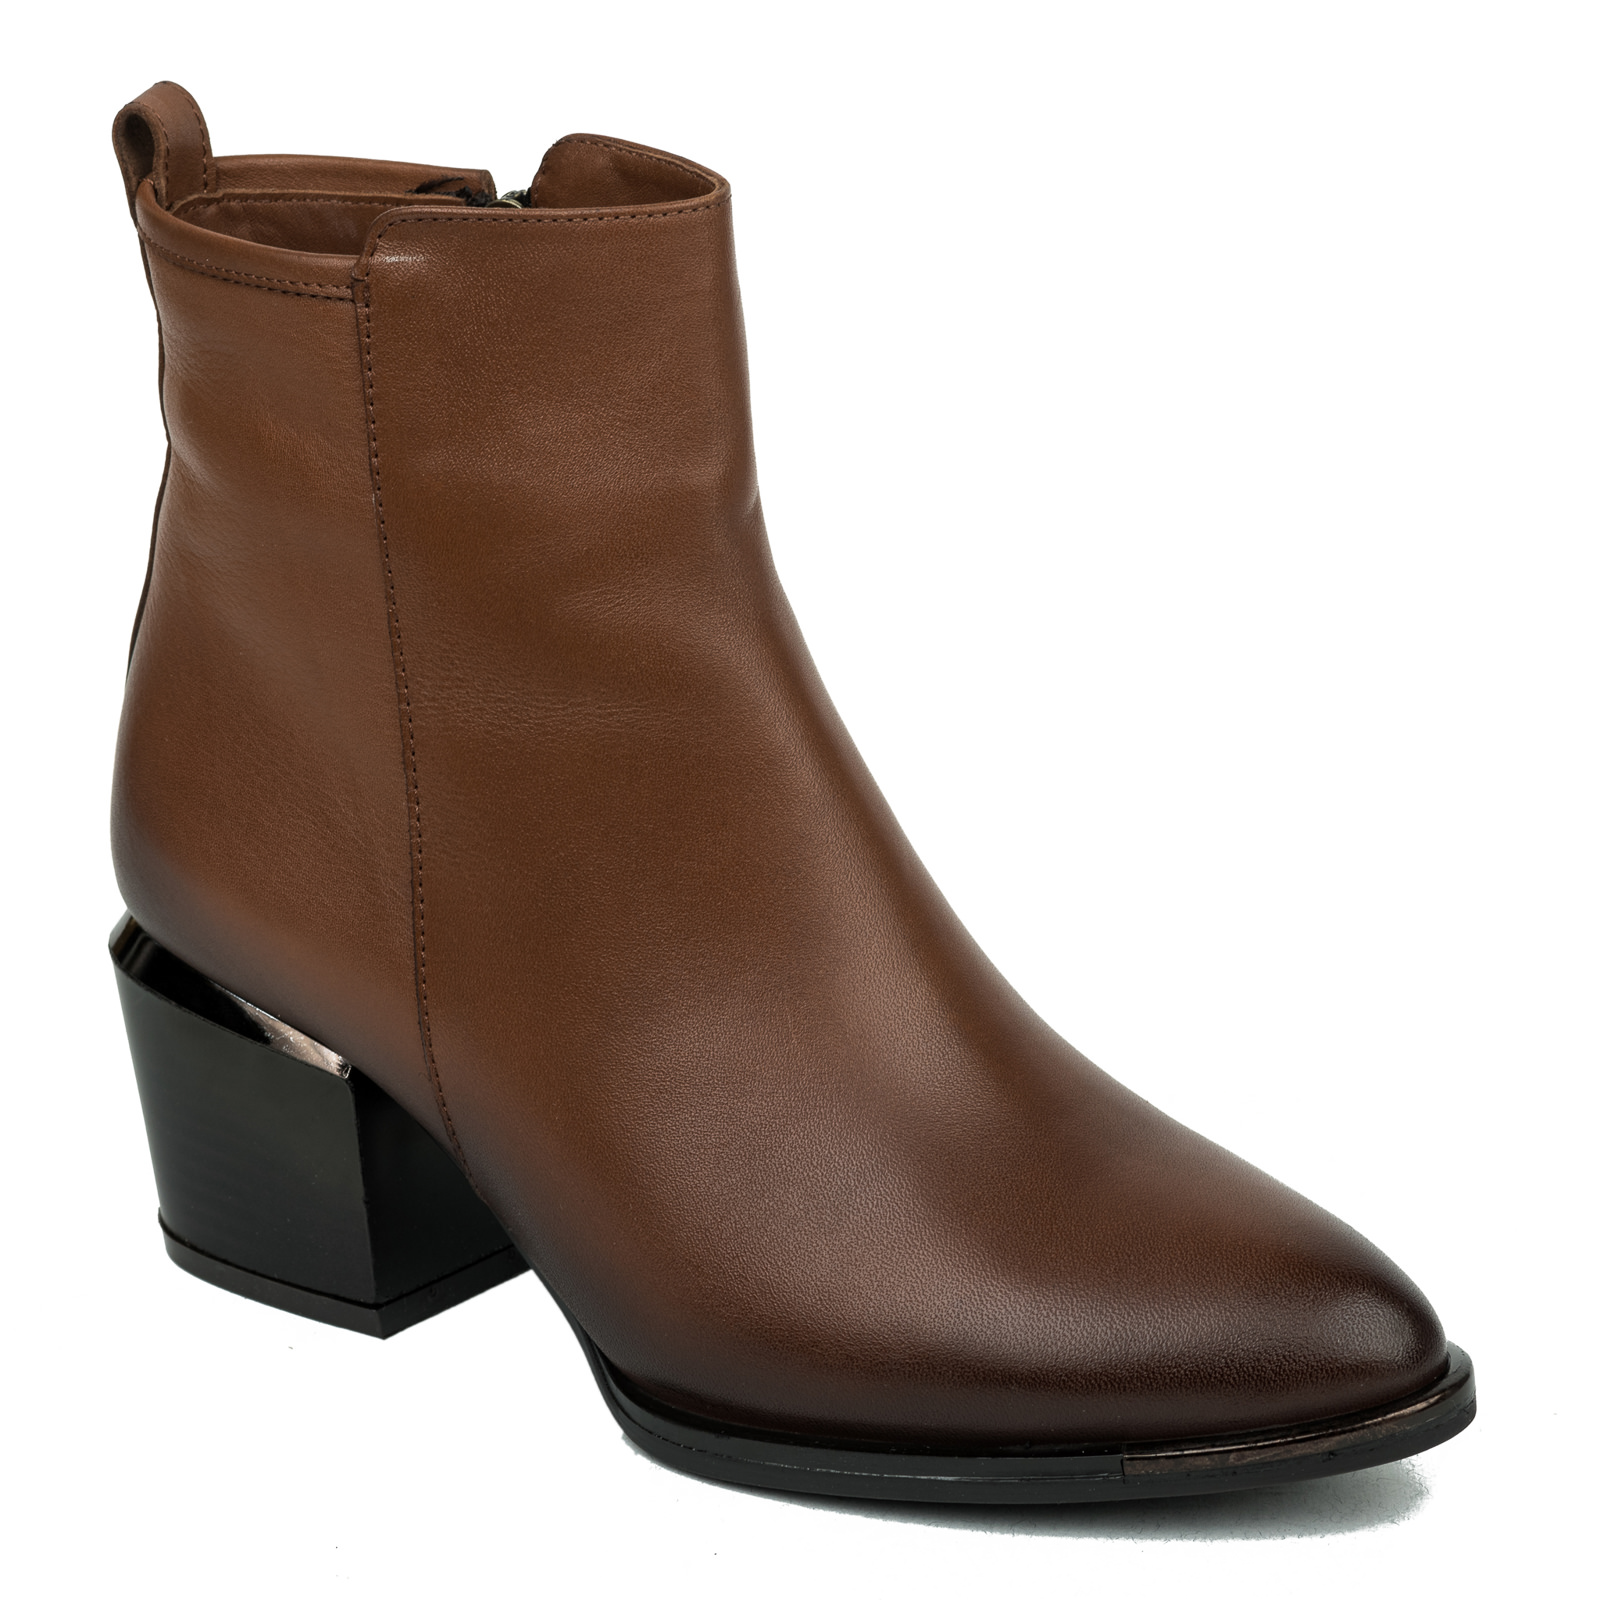 Leather ankle boots B158 - BROWN